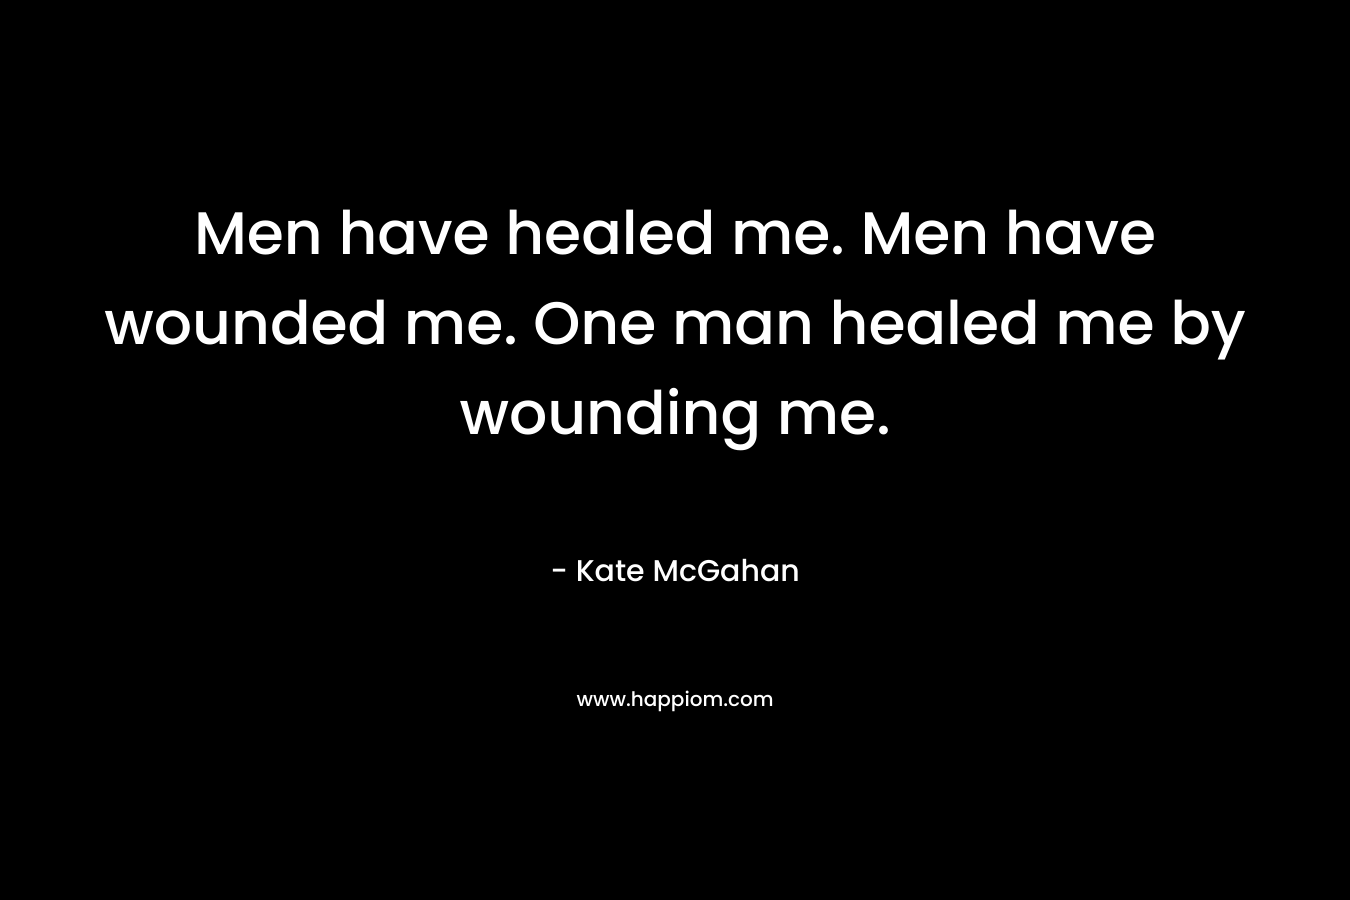 Men have healed me. Men have wounded me. One man healed me by wounding me.